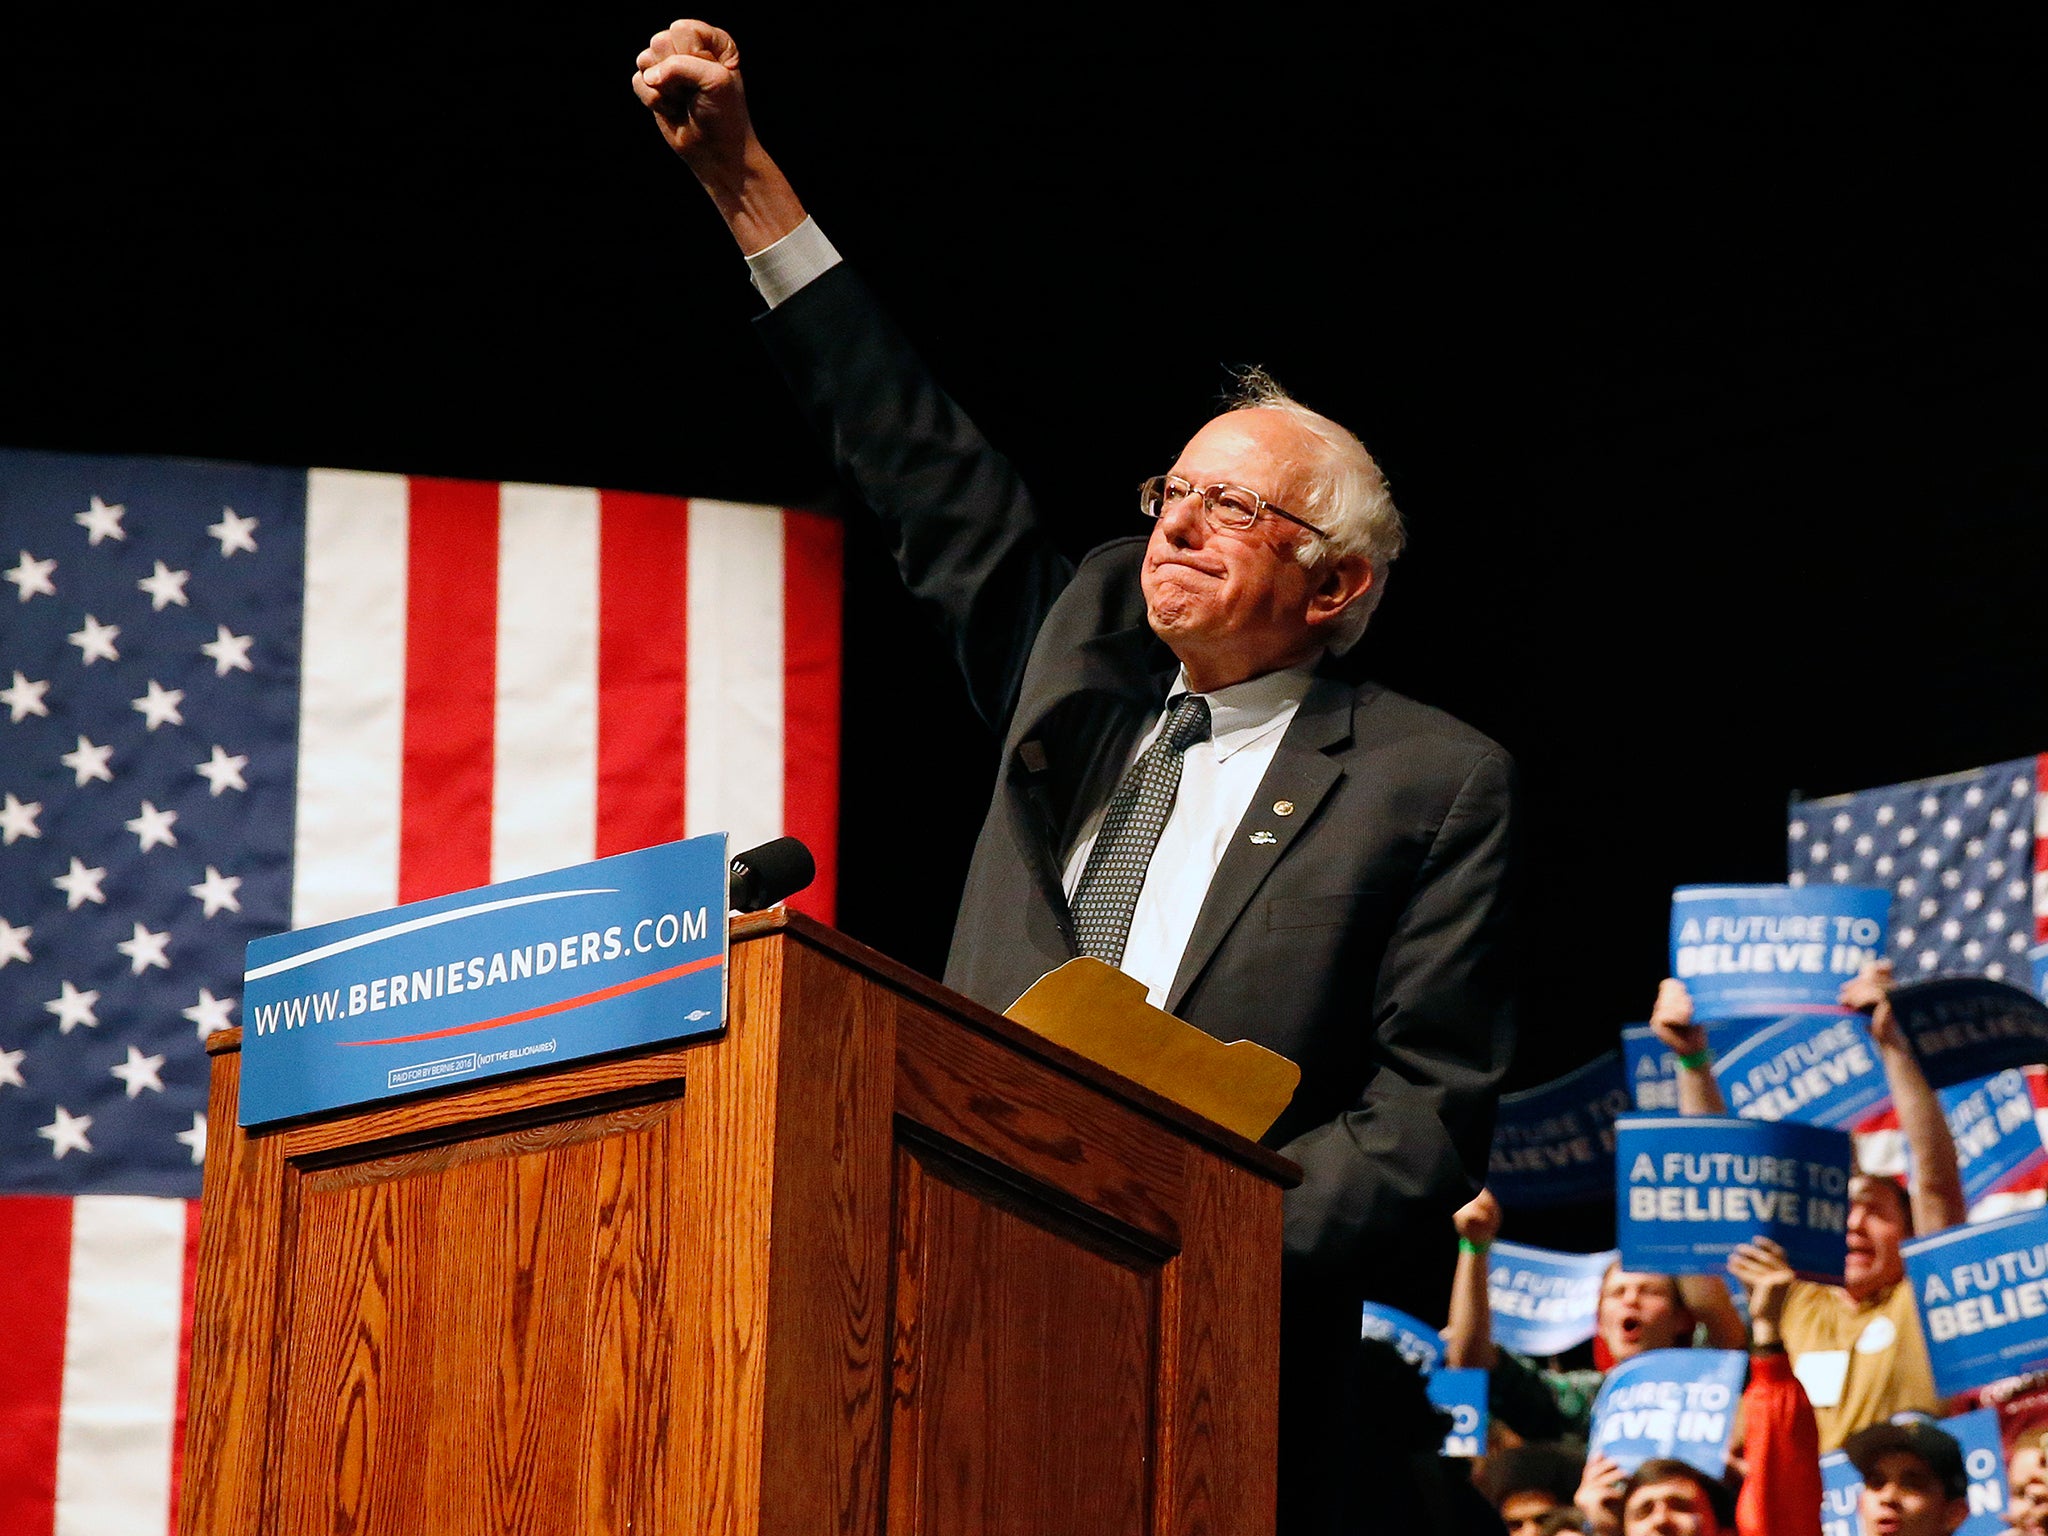 Democratic presidential candidate Bernie Sanders, gestures to supporters during a campaign rally in Laramie. Sanders won the Democratic presidential primary in Wisconsin